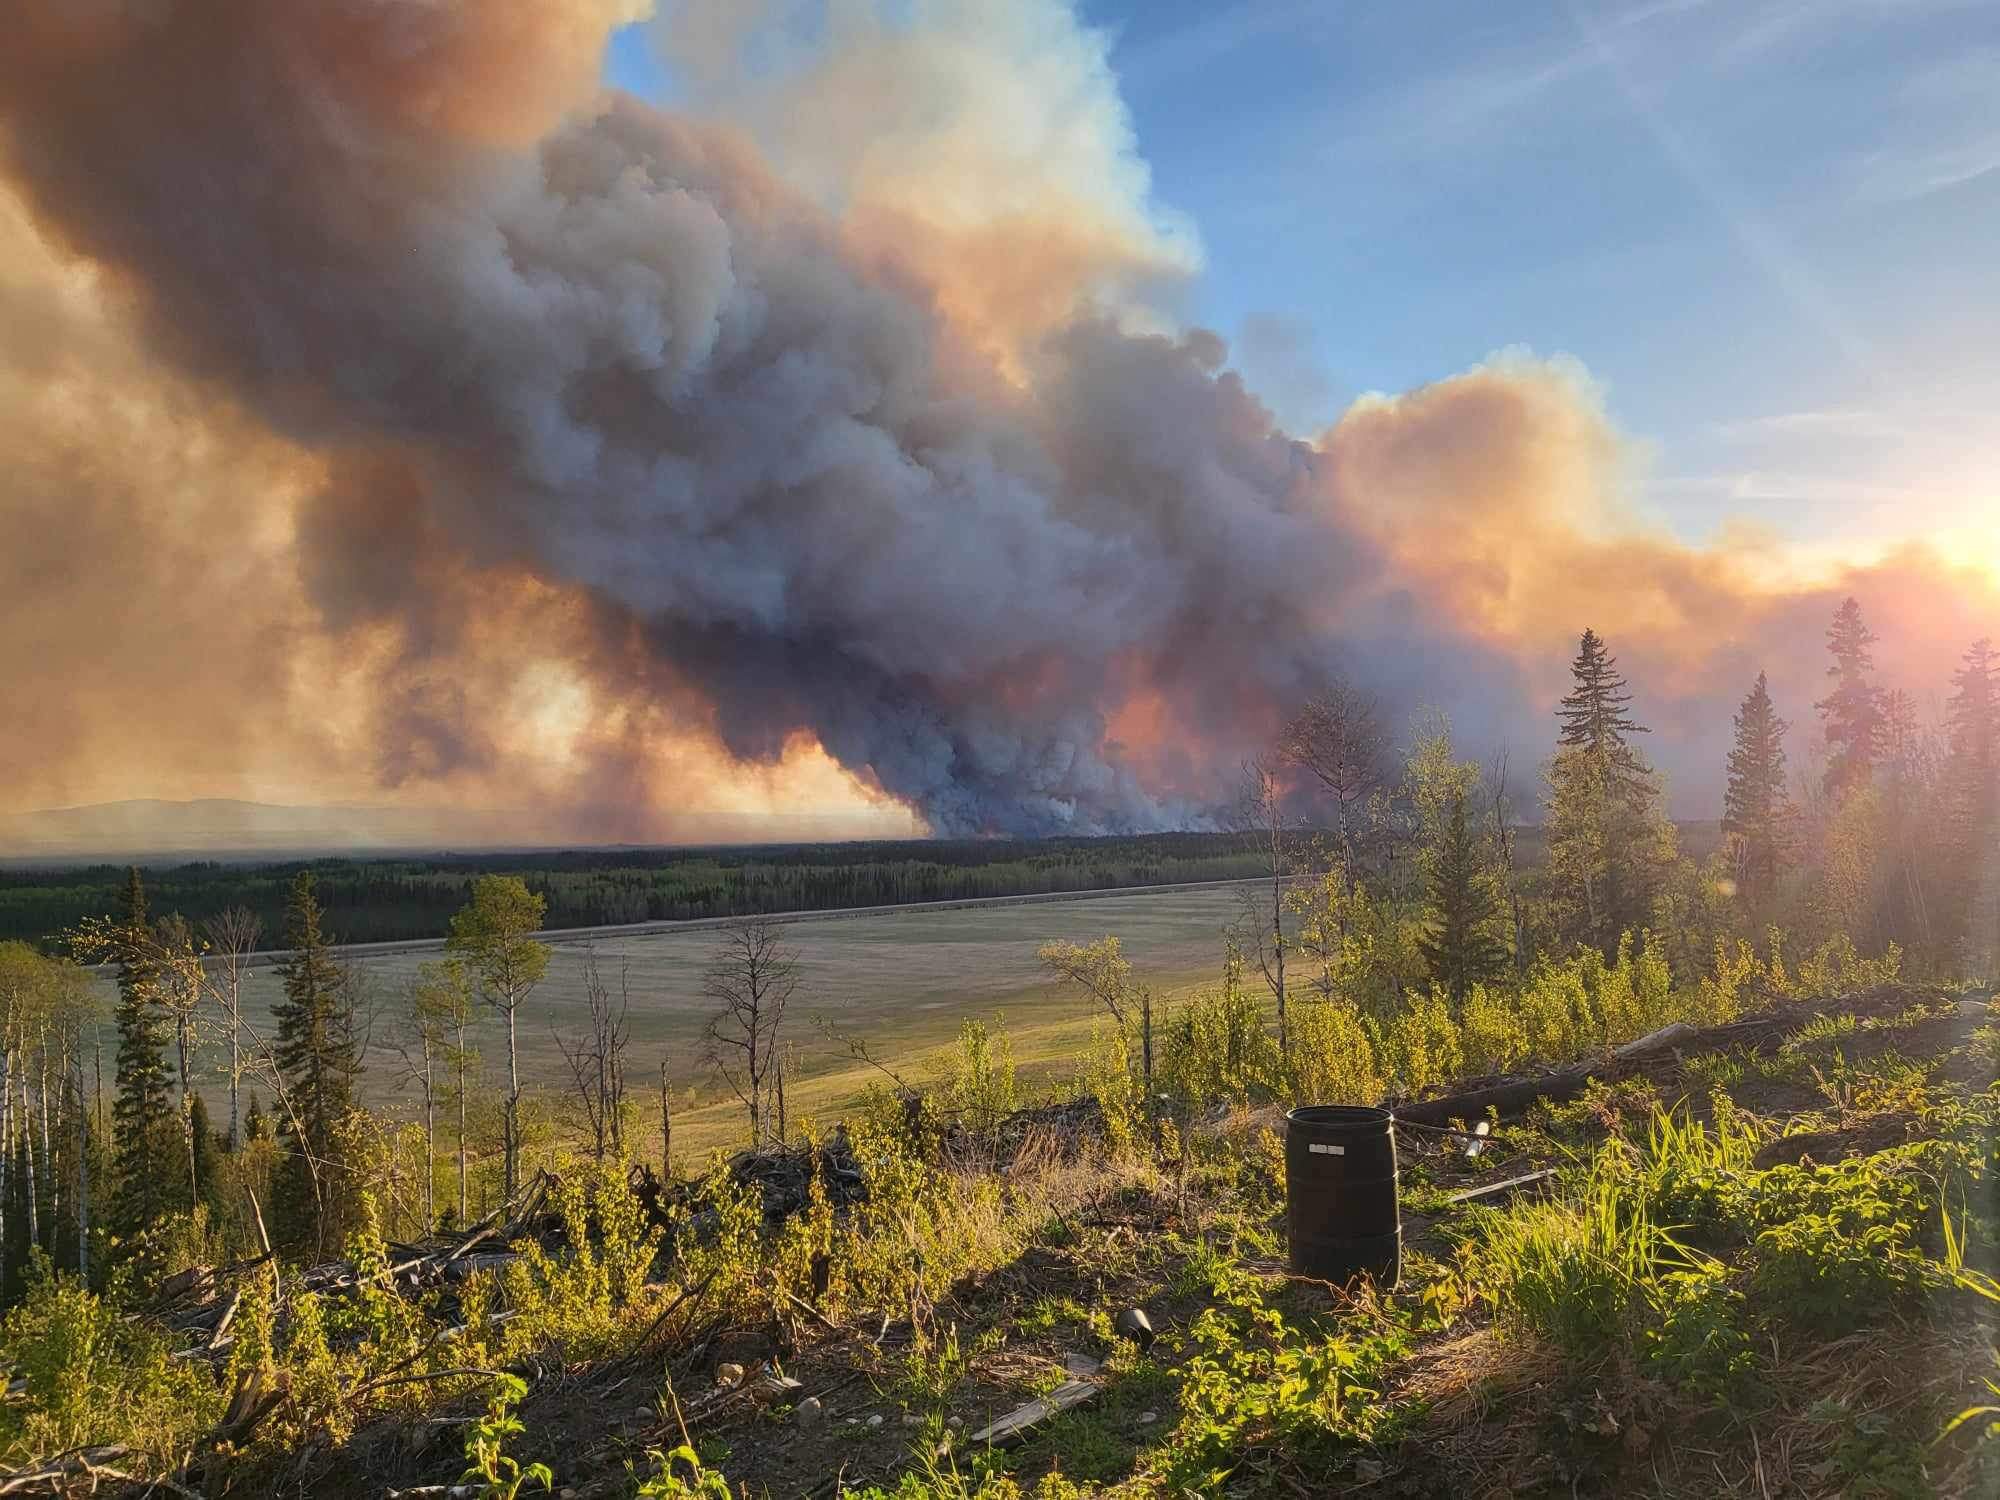 Evacuation orders increase in parts of B.C. due to wildfires burning